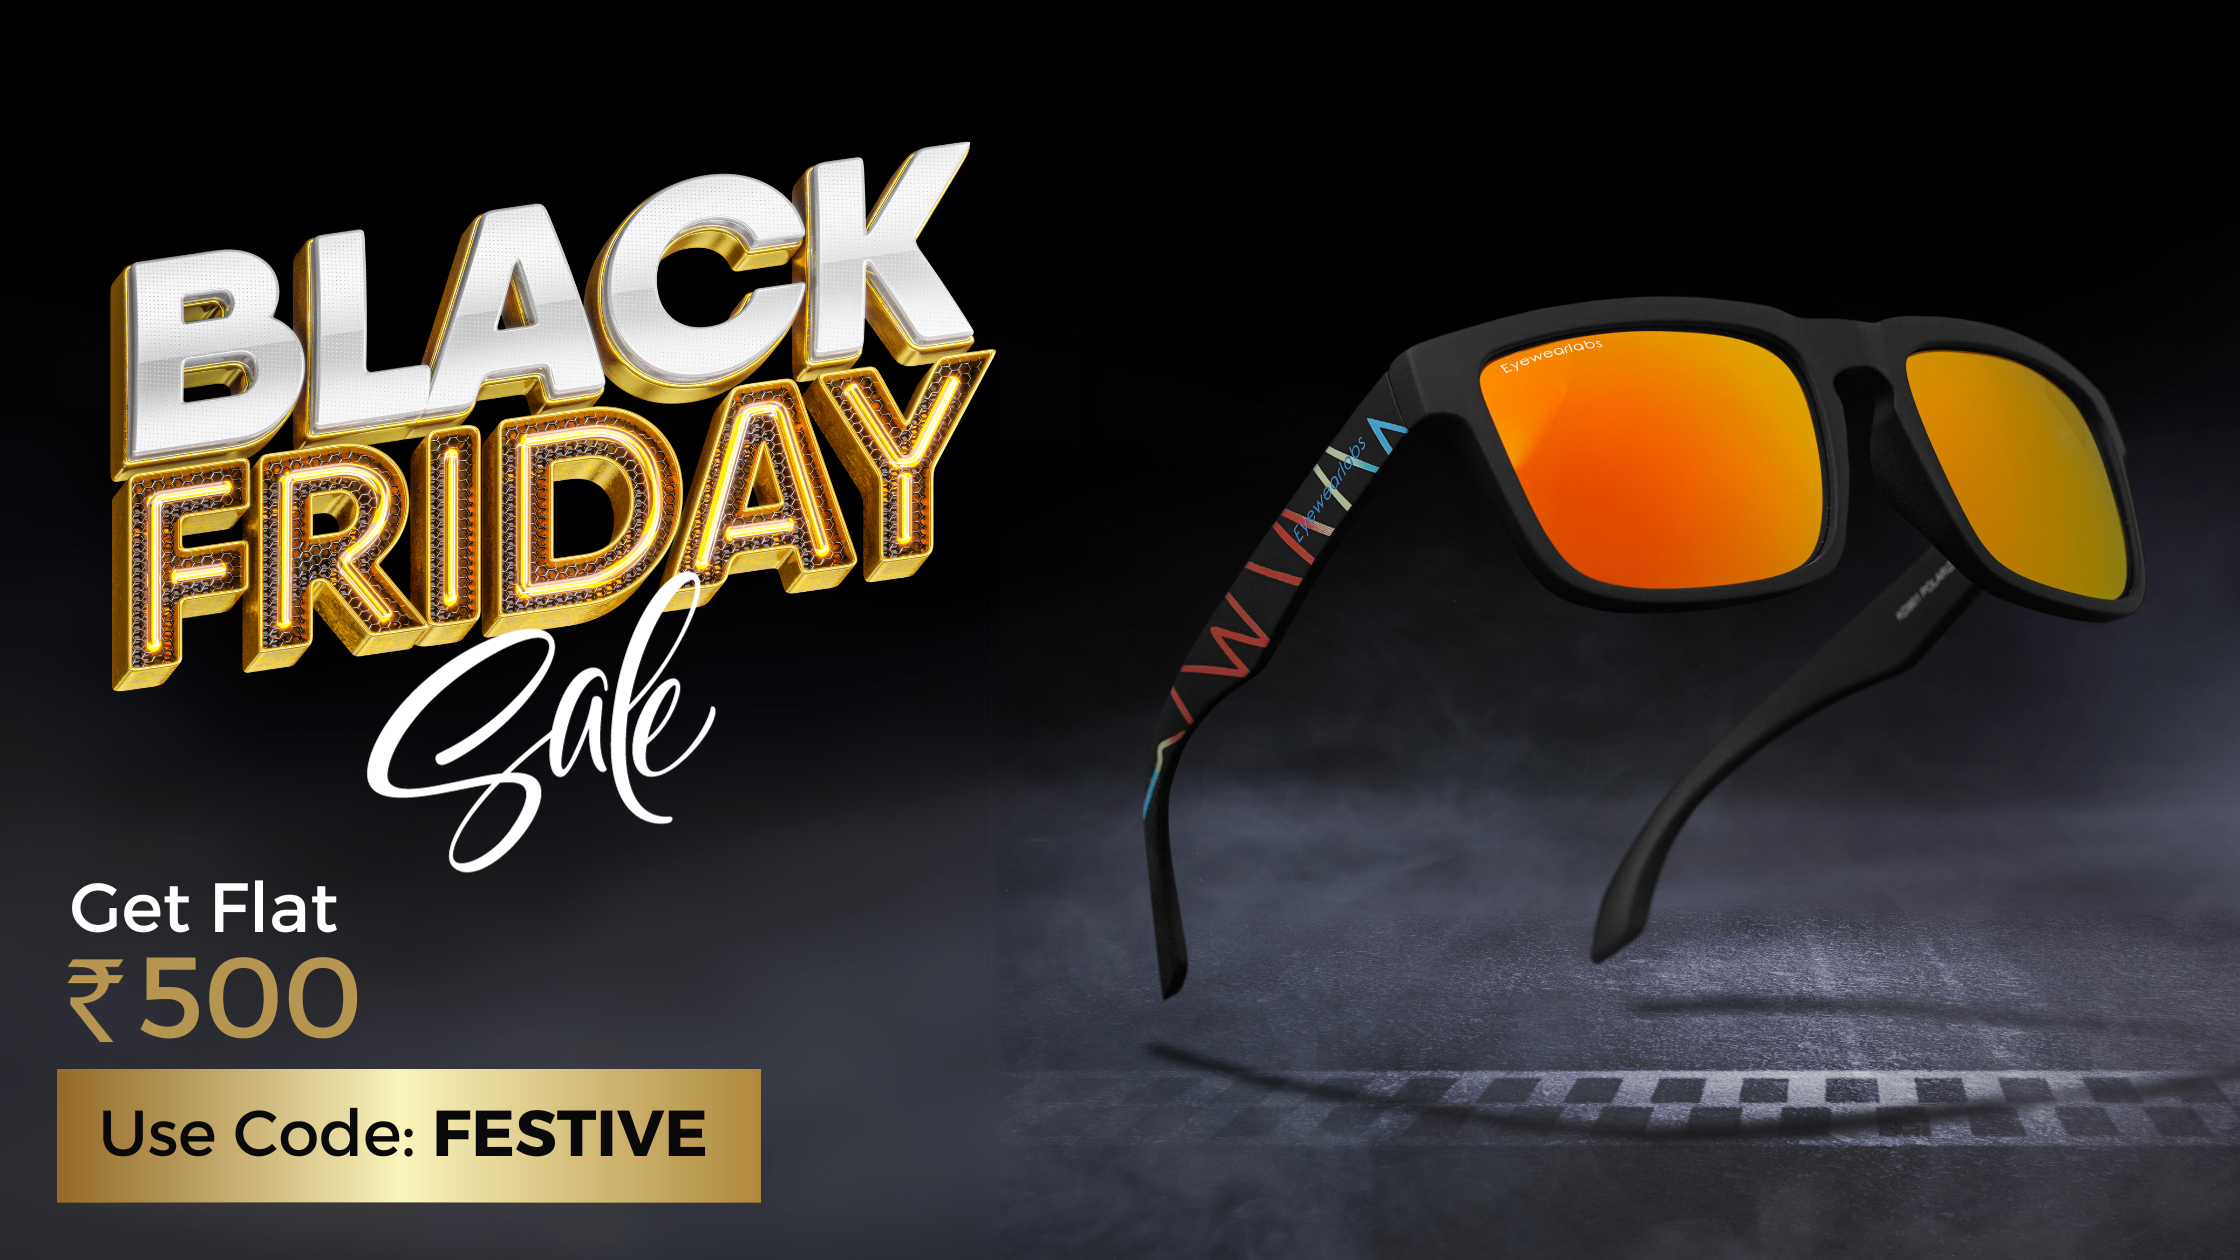 Black Friday Specials on EyewearLabs Sunglasses You Can't Miss